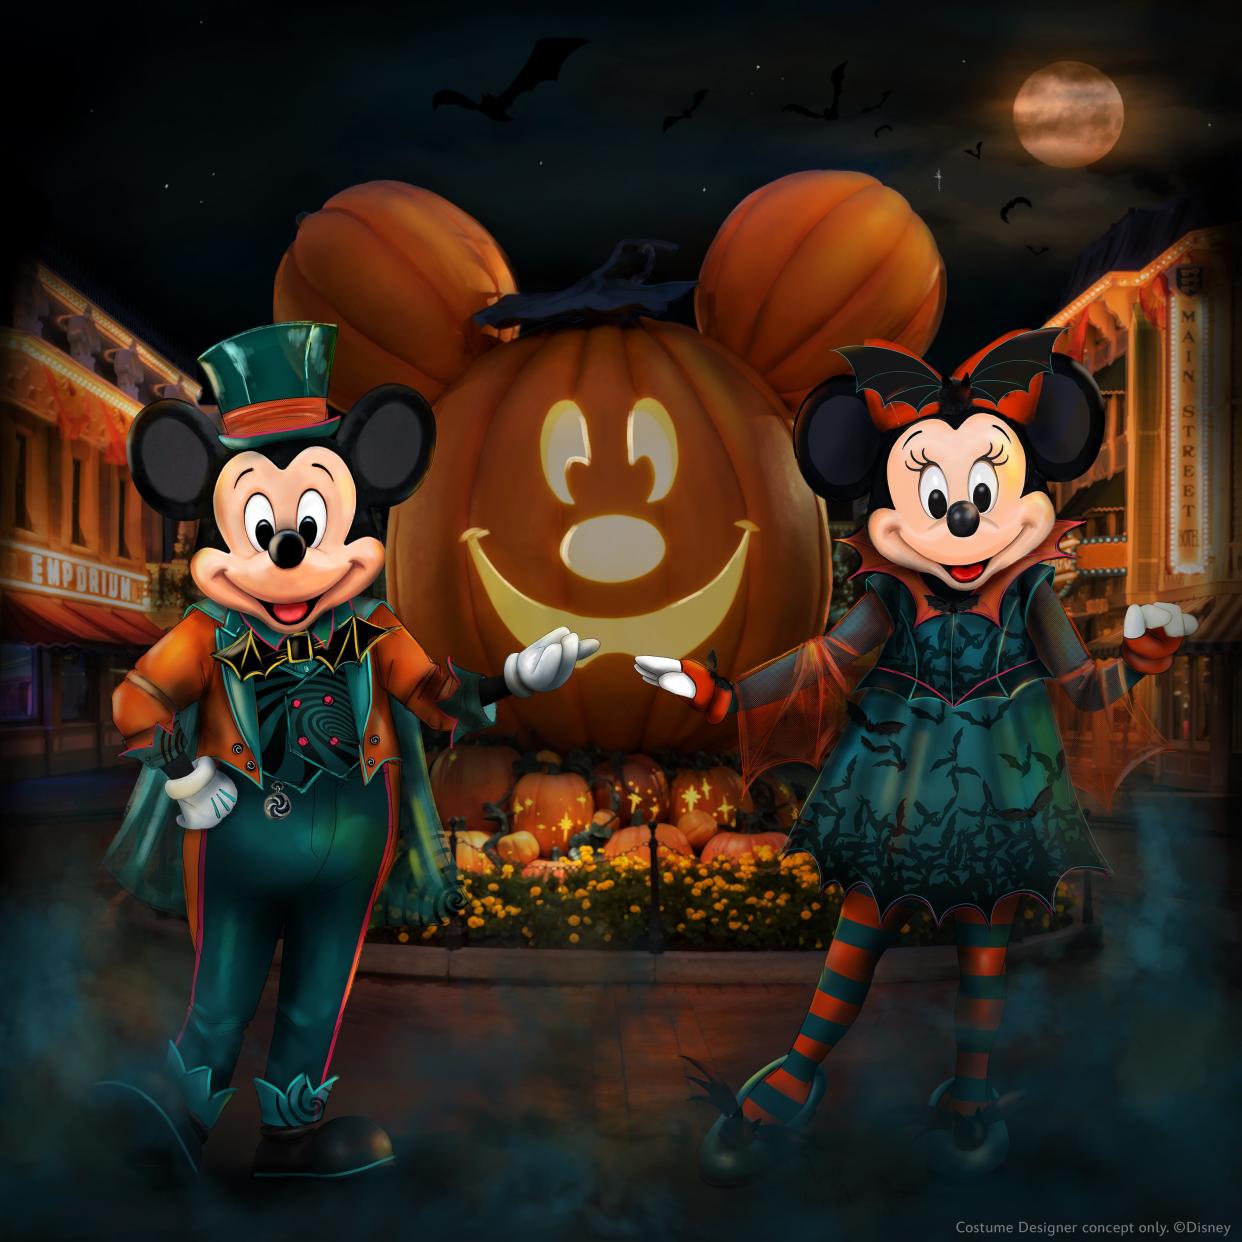 Mickey Mouse and Minnie Mouse will debut new Halloween outfits this year at Disneyland Resort.